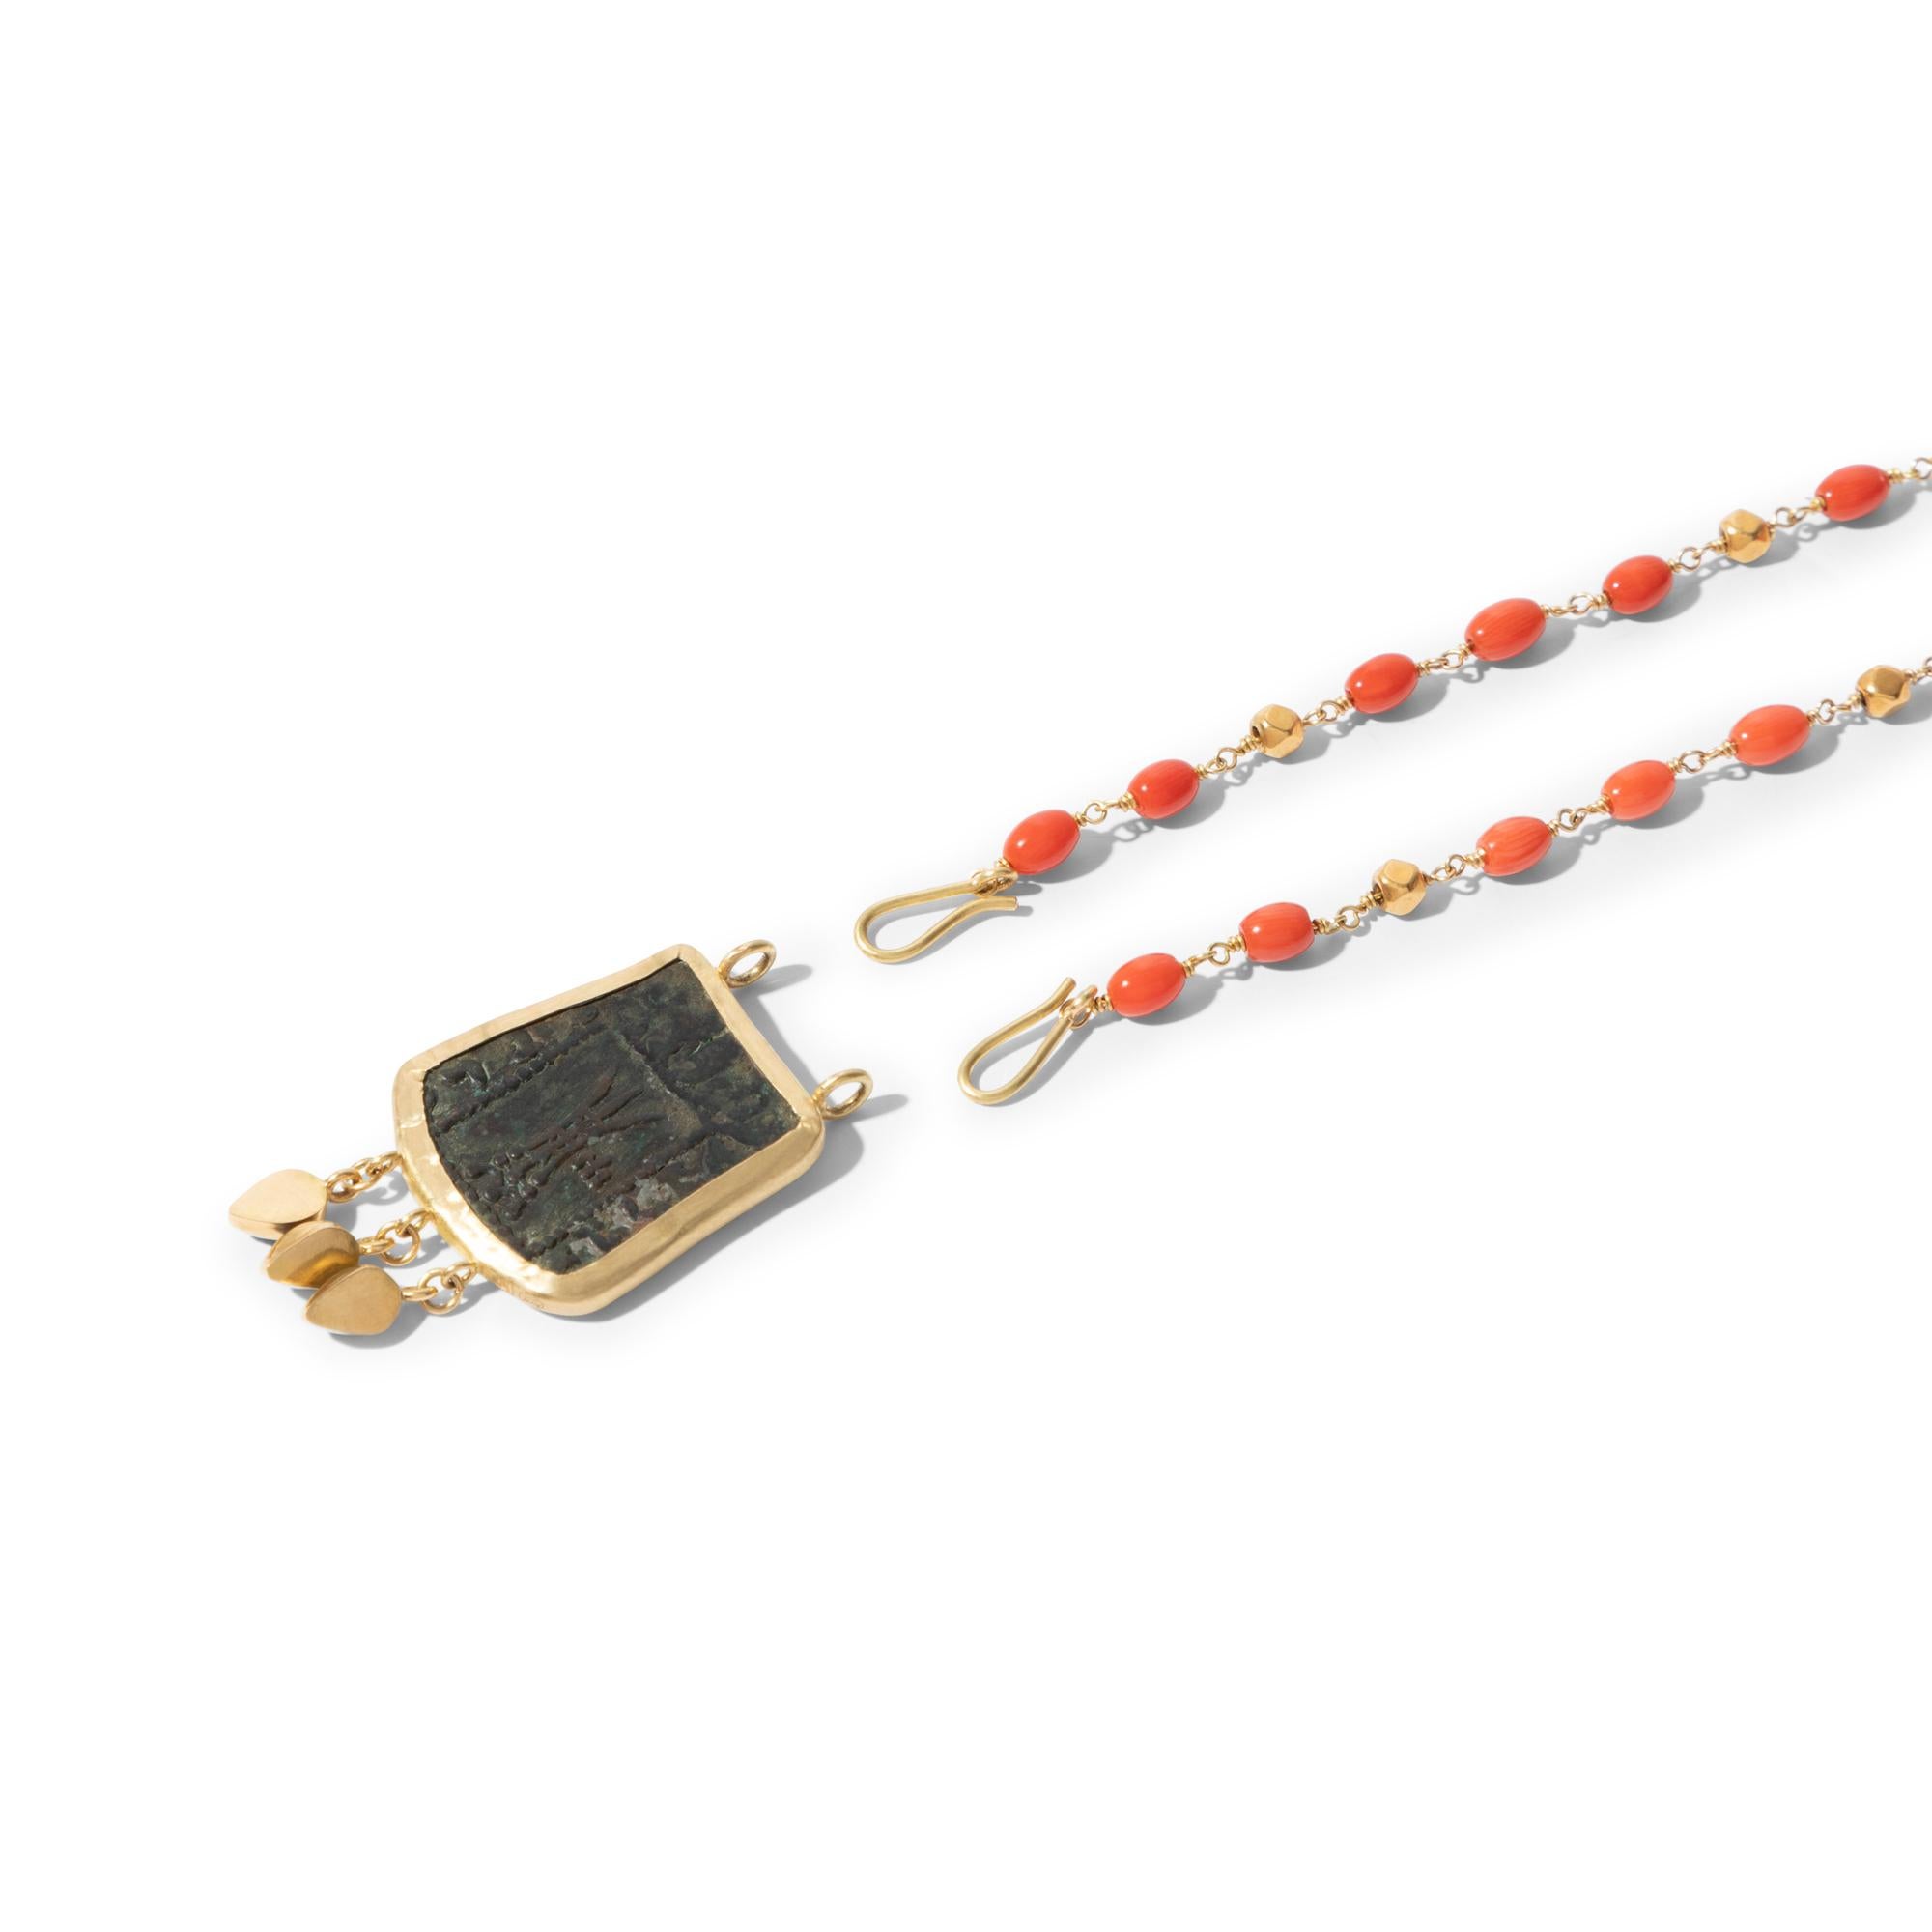 Artisan 18k Gold Sautoir Necklace with Gold and Coral Beads and Detachable Antique Coin For Sale